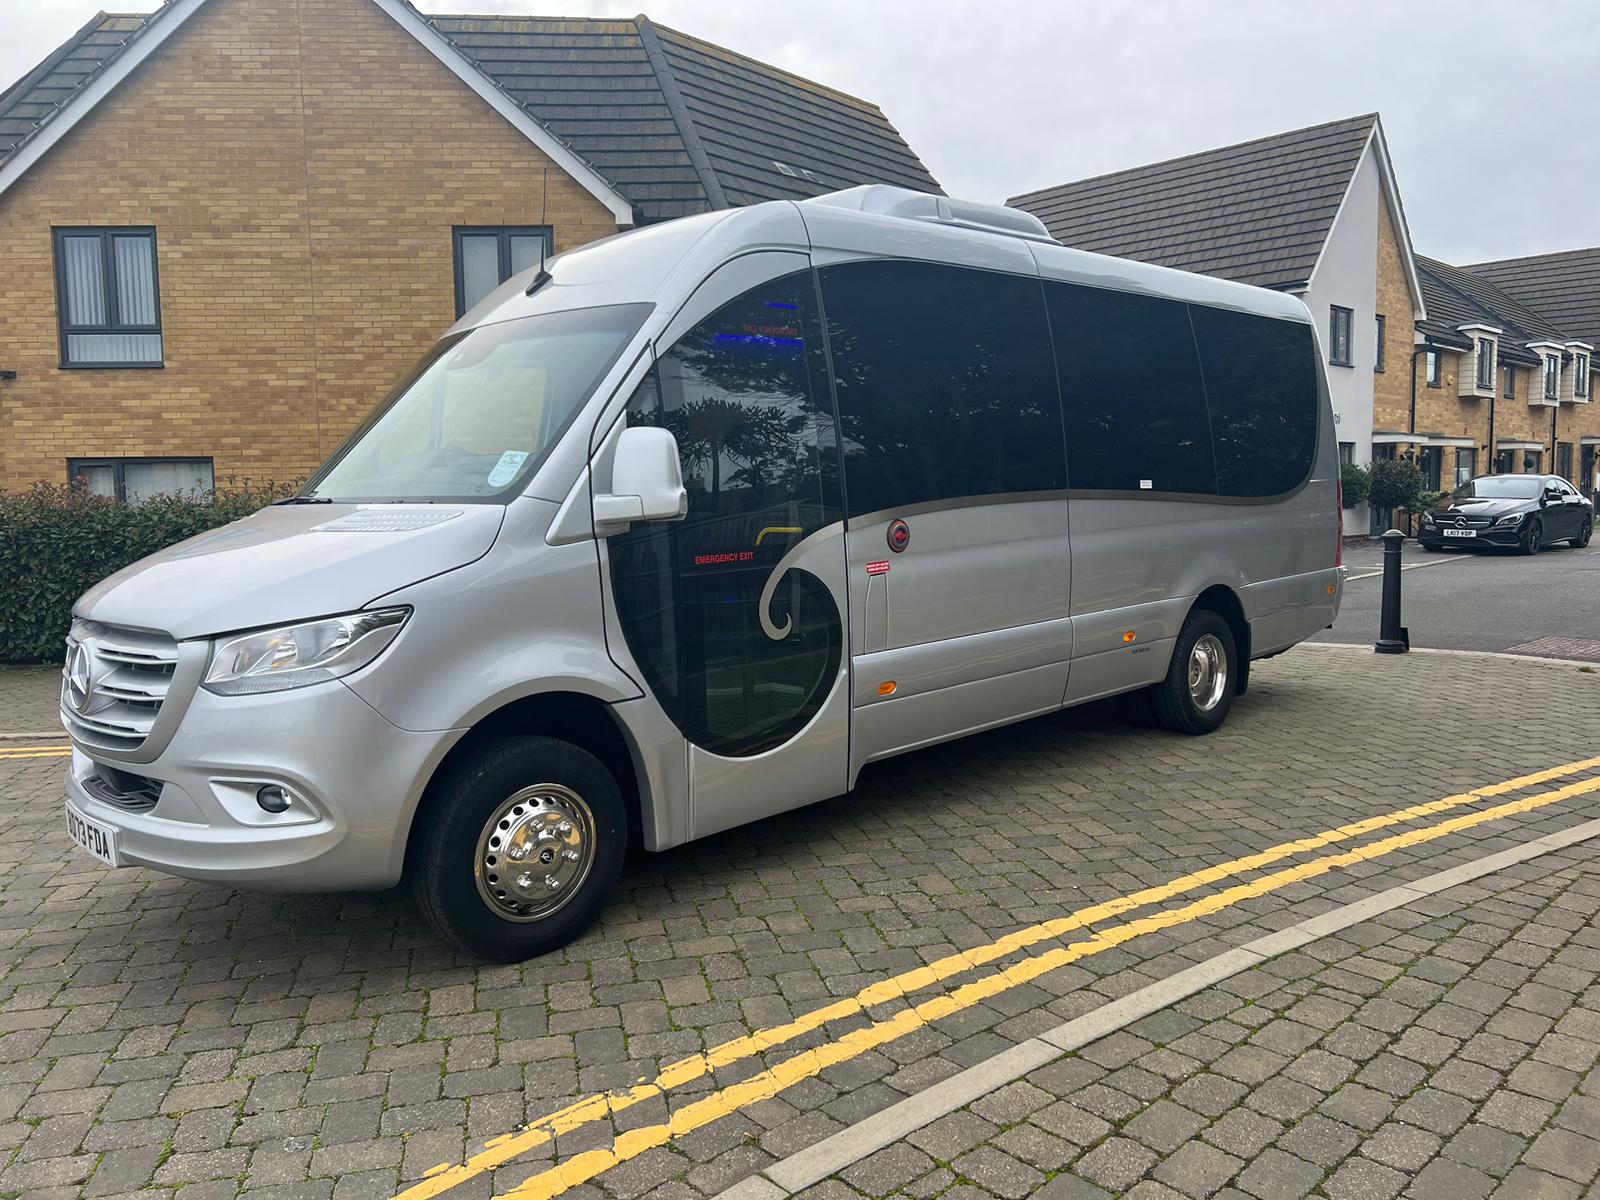 Minibus Hire Tips: What to Know Before You Book